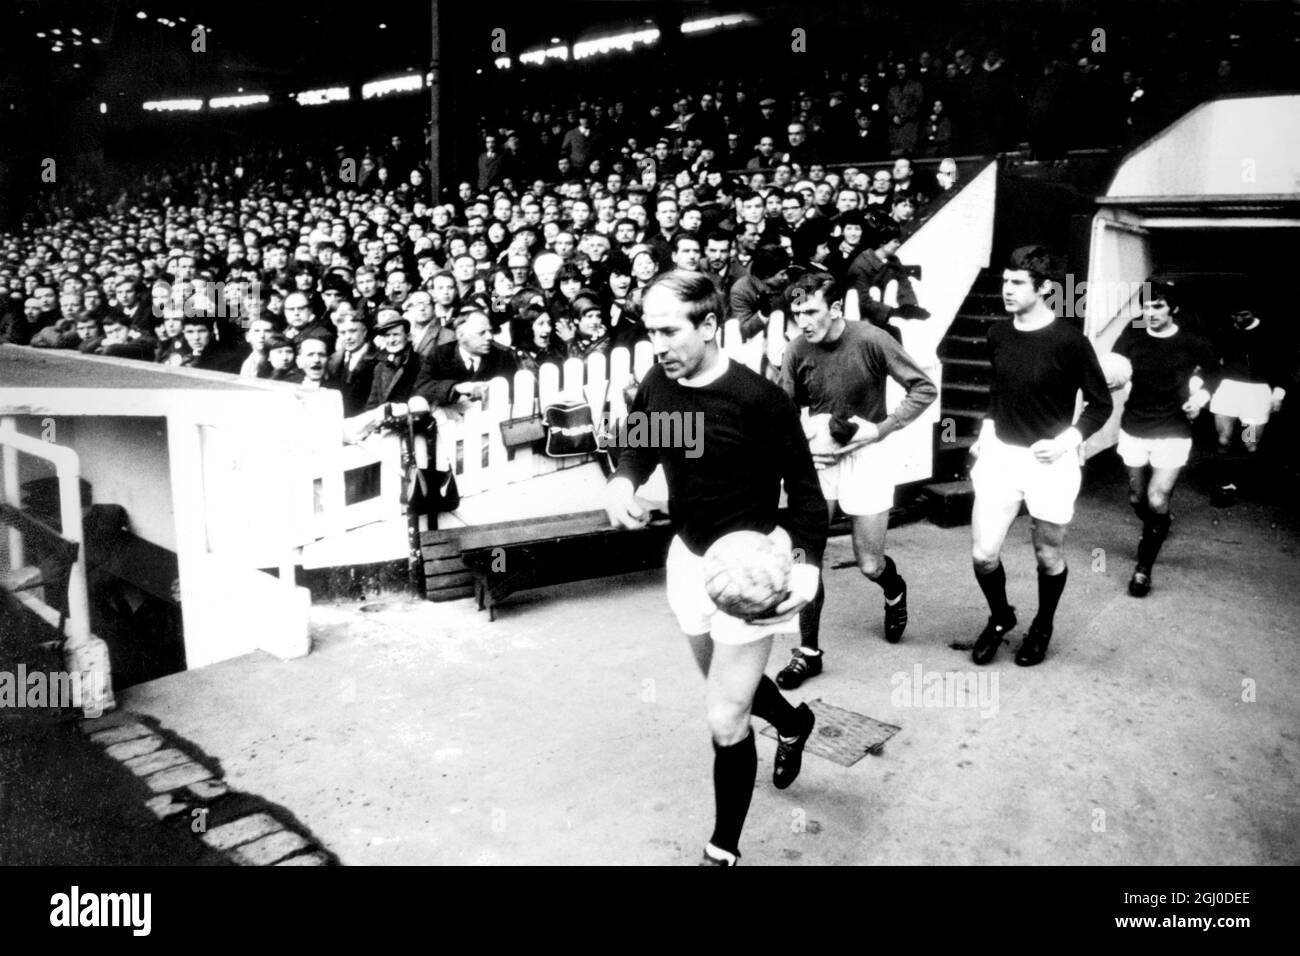 Bobby Charlton of Manchester United leads his players out onto the pitch. Behind him are goalkeeper Alex Stepney, Brian Kidd and George Best. May 1968. Stock Photo